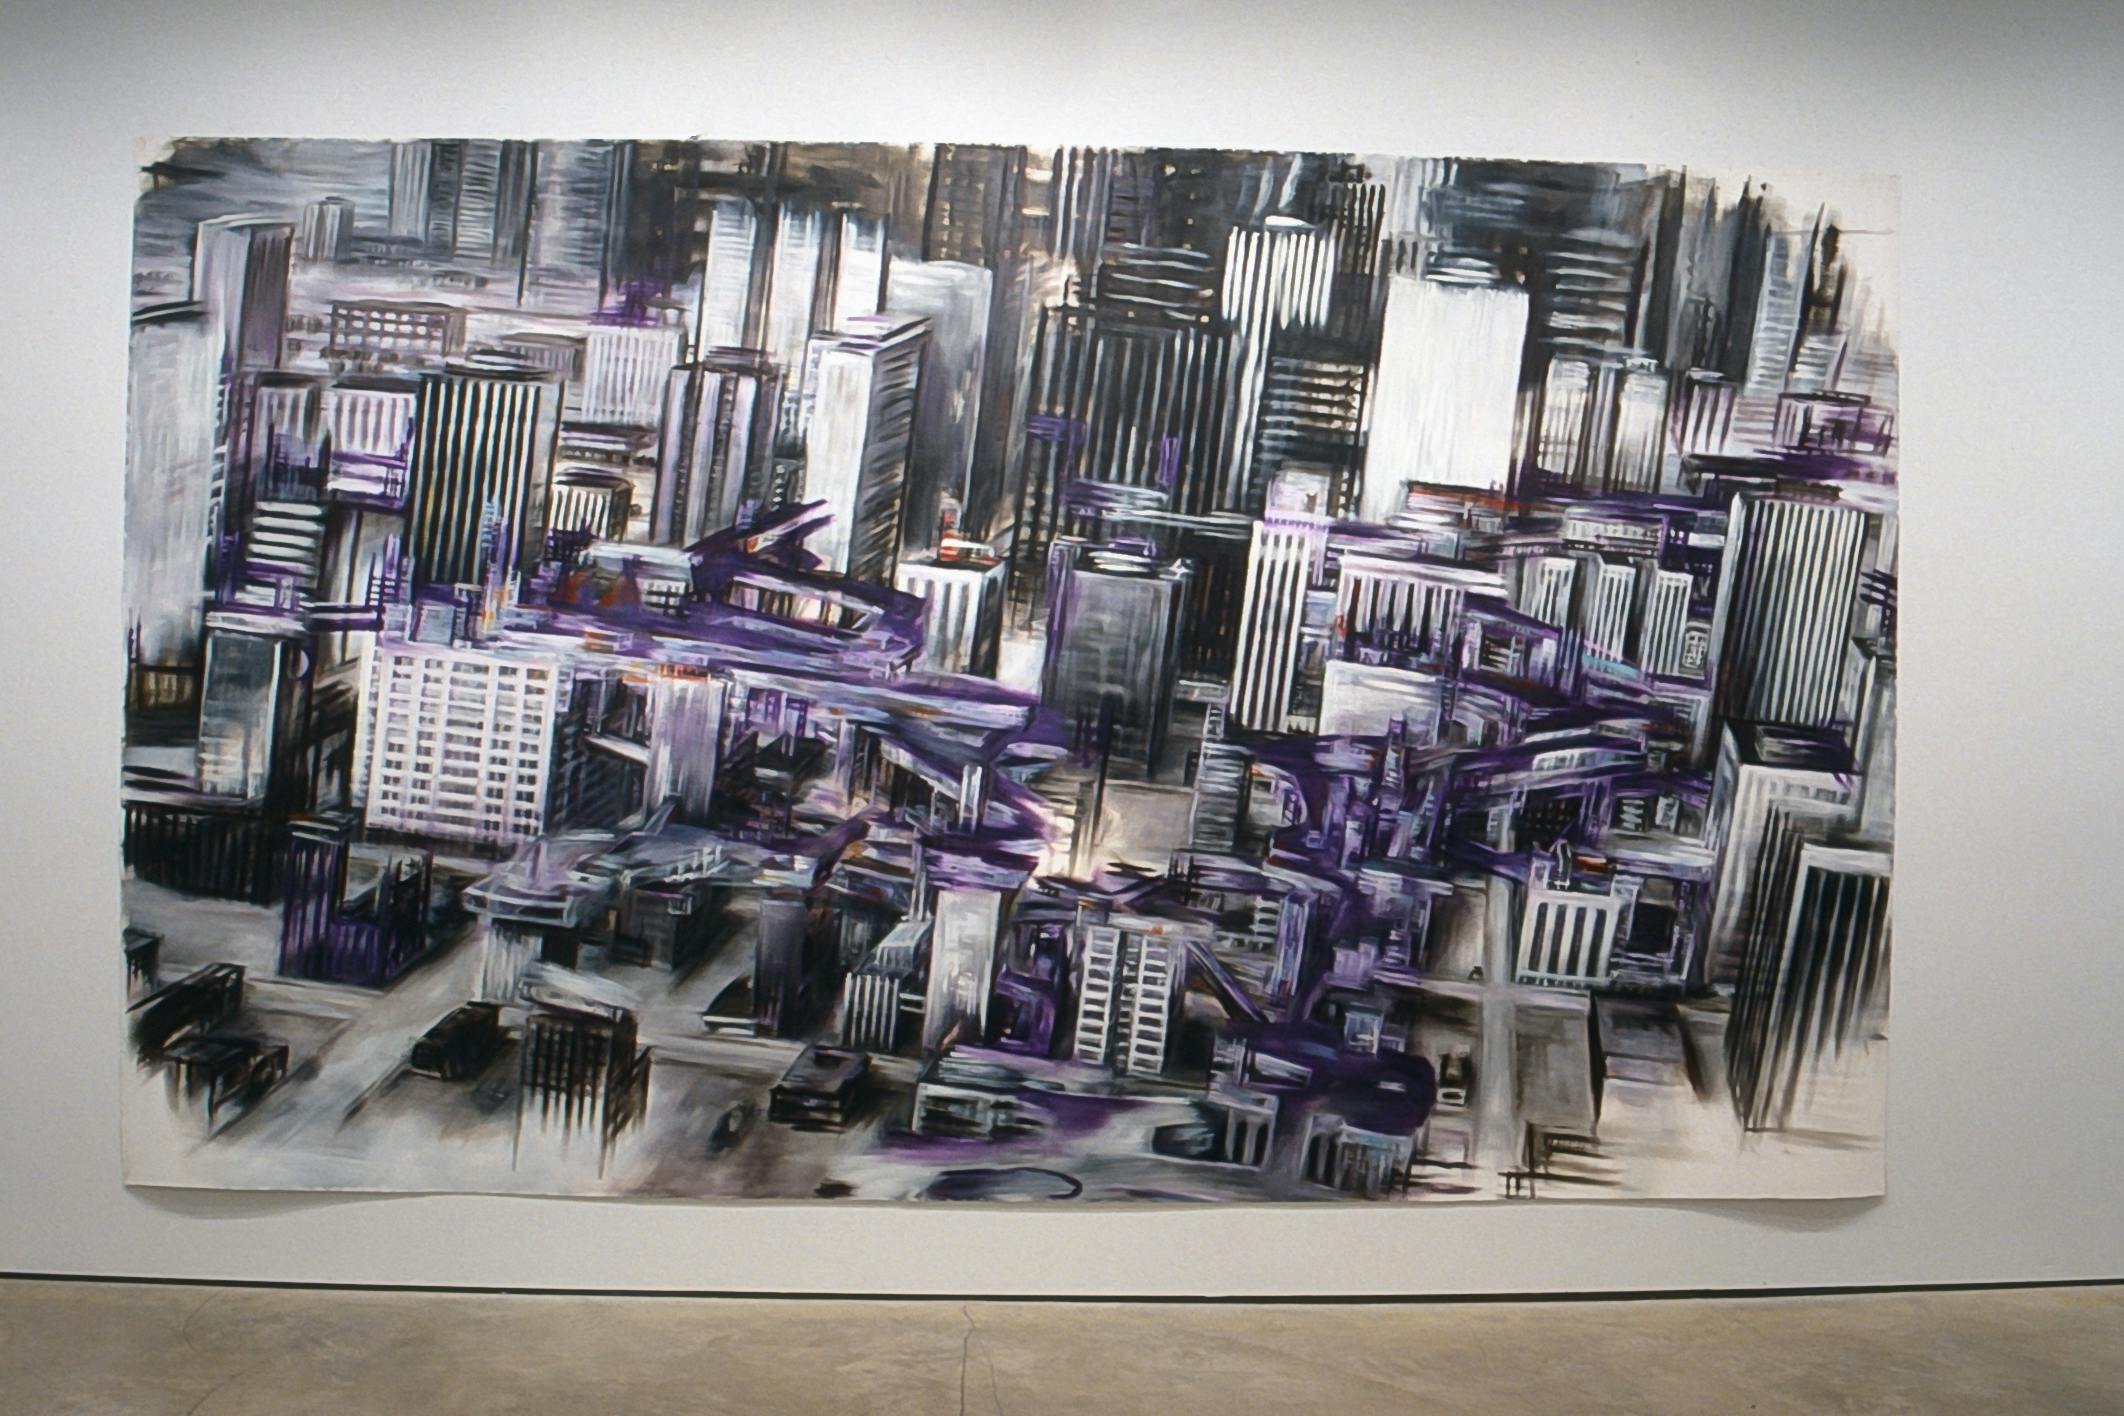 A large-scale painting is installed on the gallery wall. It depicts an aerial view of an urban city where purple highways run between skyscrapers. The buildings are slightly tilted to the right angle. 